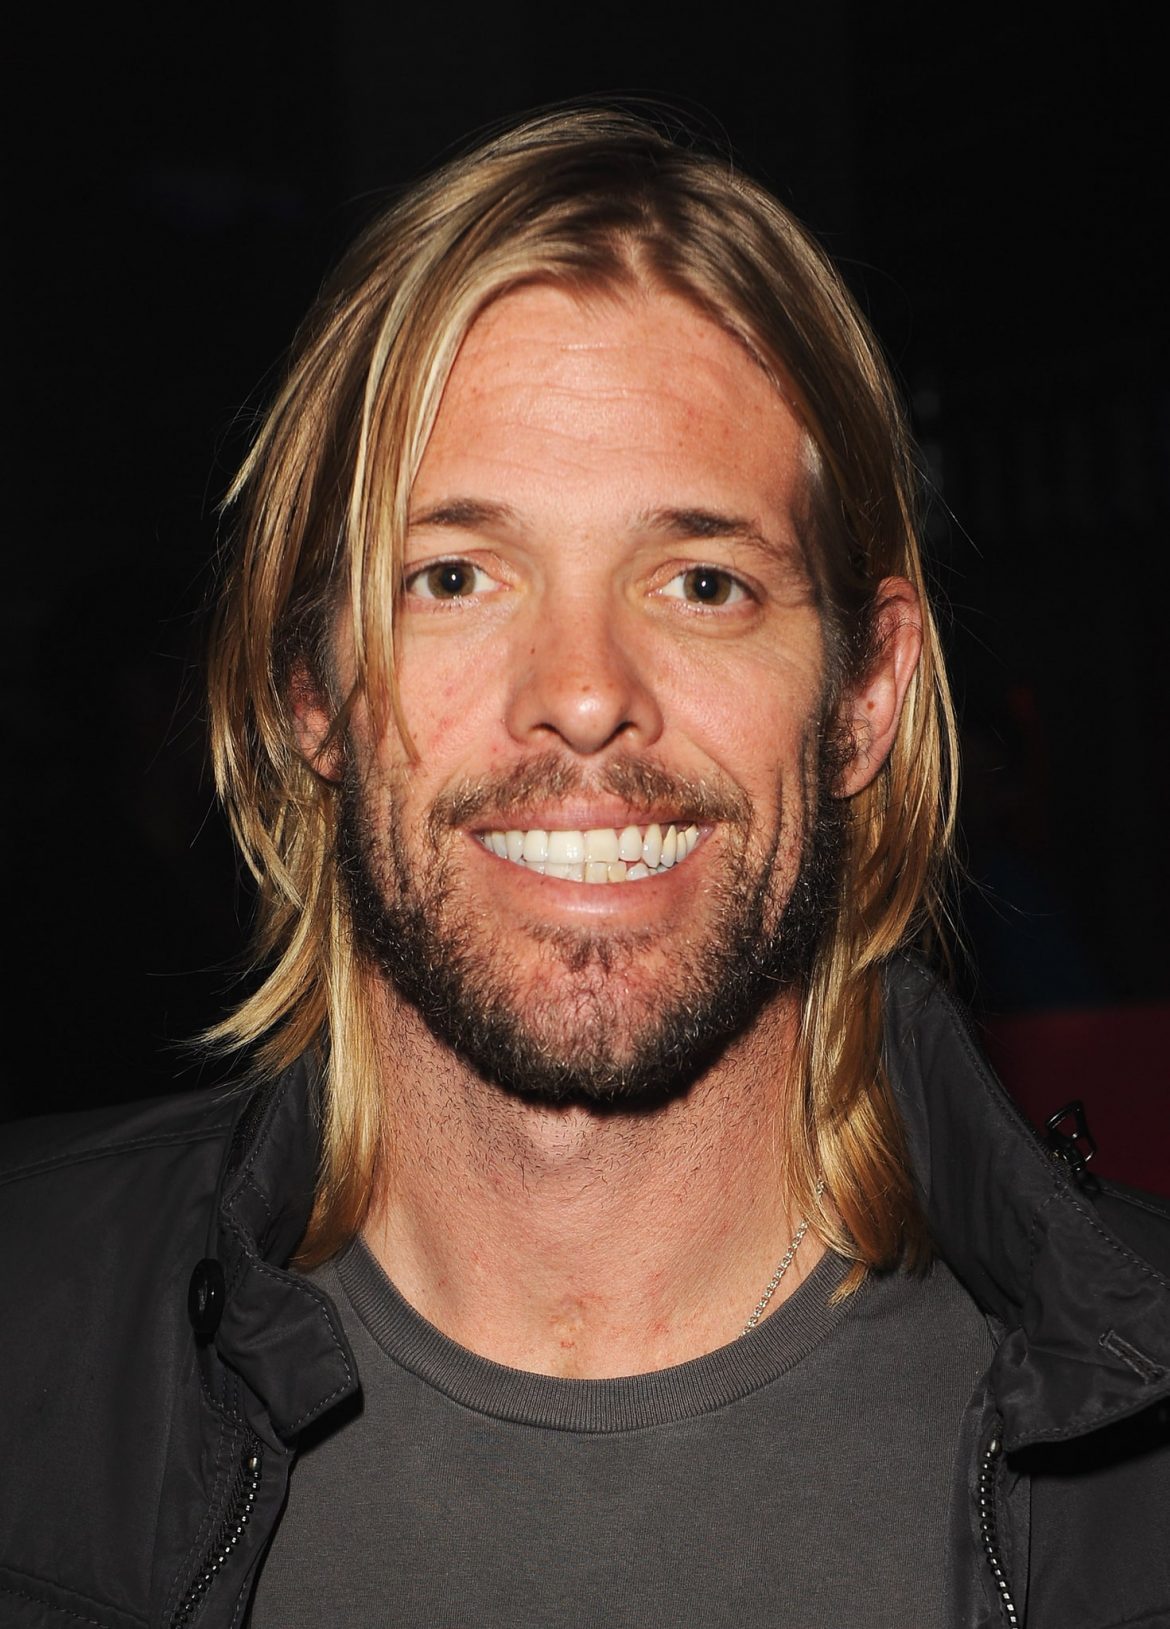 Taylor Hawkins: Foo Fighters drummer likely died from vaccine-induced myocarditis, as mainstream media push the “drug overdose” narrative